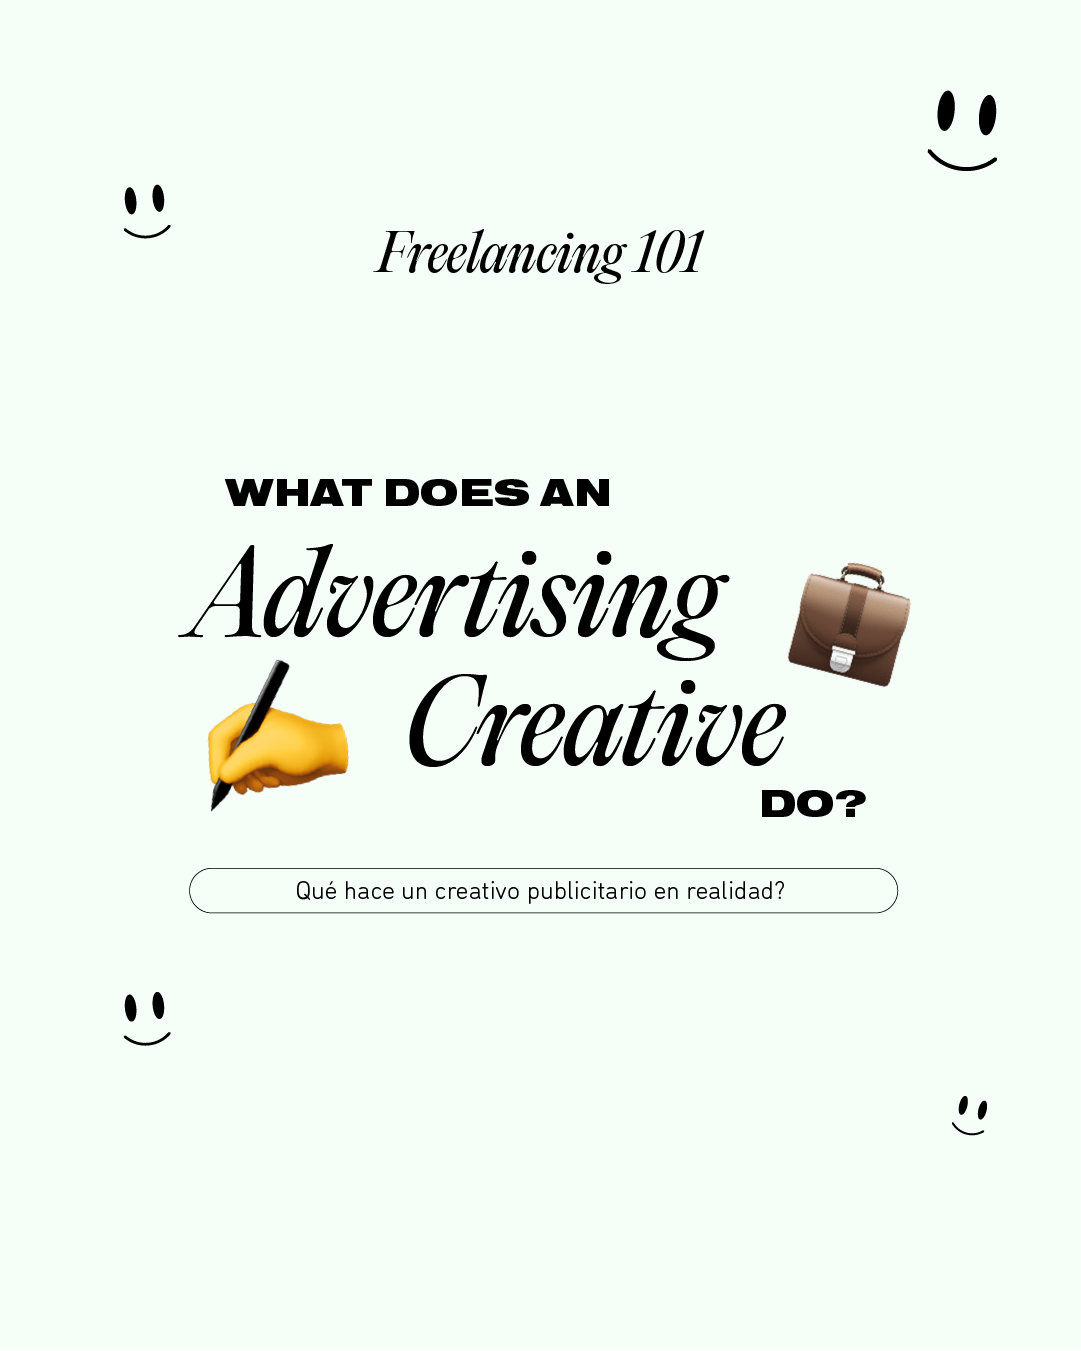 What Does An Advertising Creative Do?